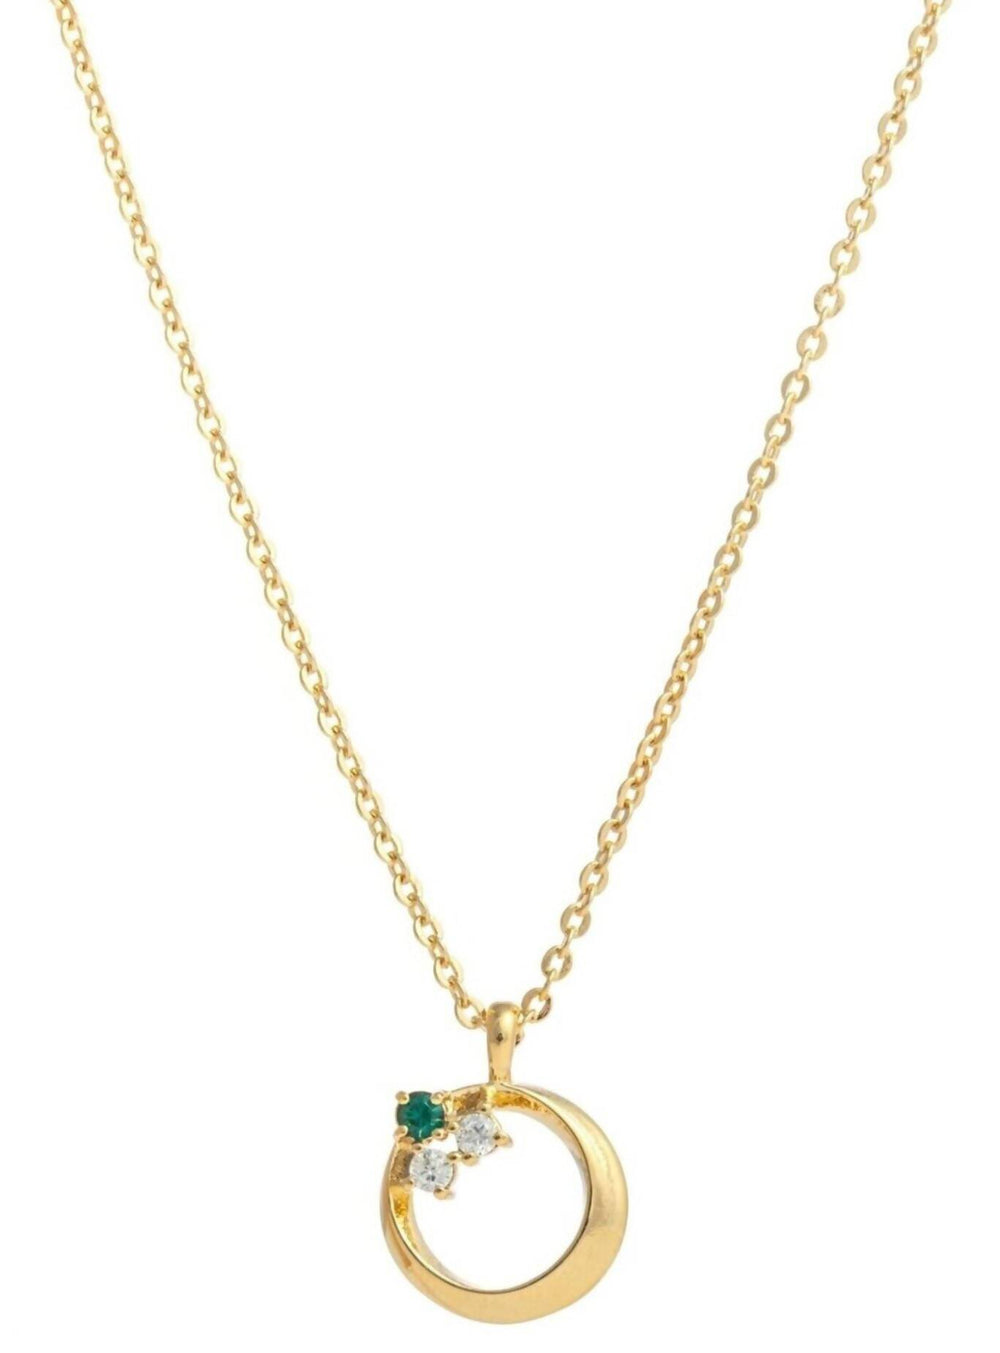 Astra- A Dainty Pendant with Crystals made with Swarovski Elements Pendants Forest Jewelry Emerald 